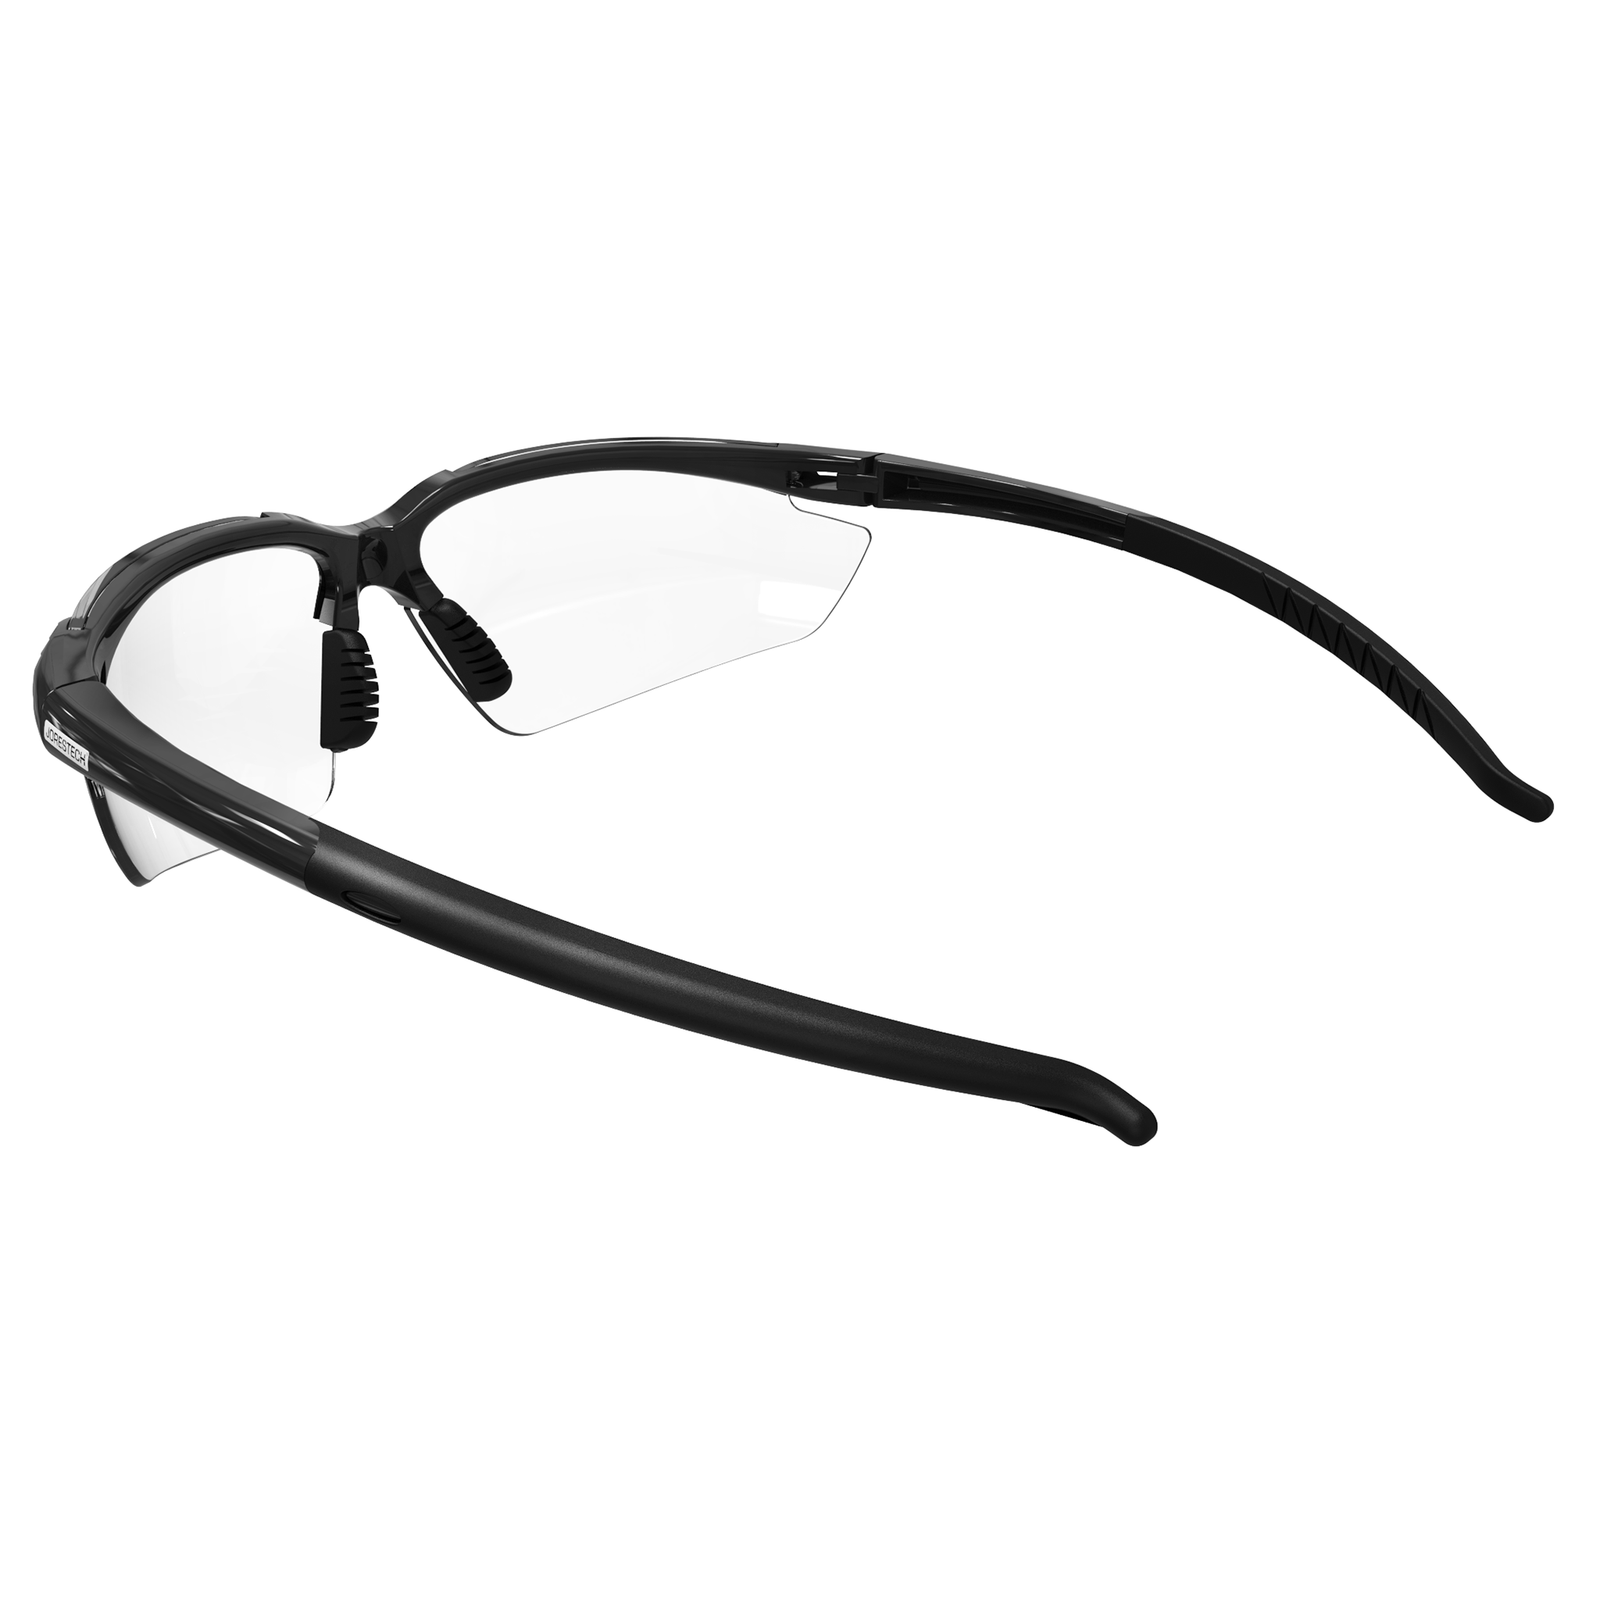 ANSI Z87 + Compliant high impact safety glasses with flexible rubber temple with clear lenses and black frame and temples